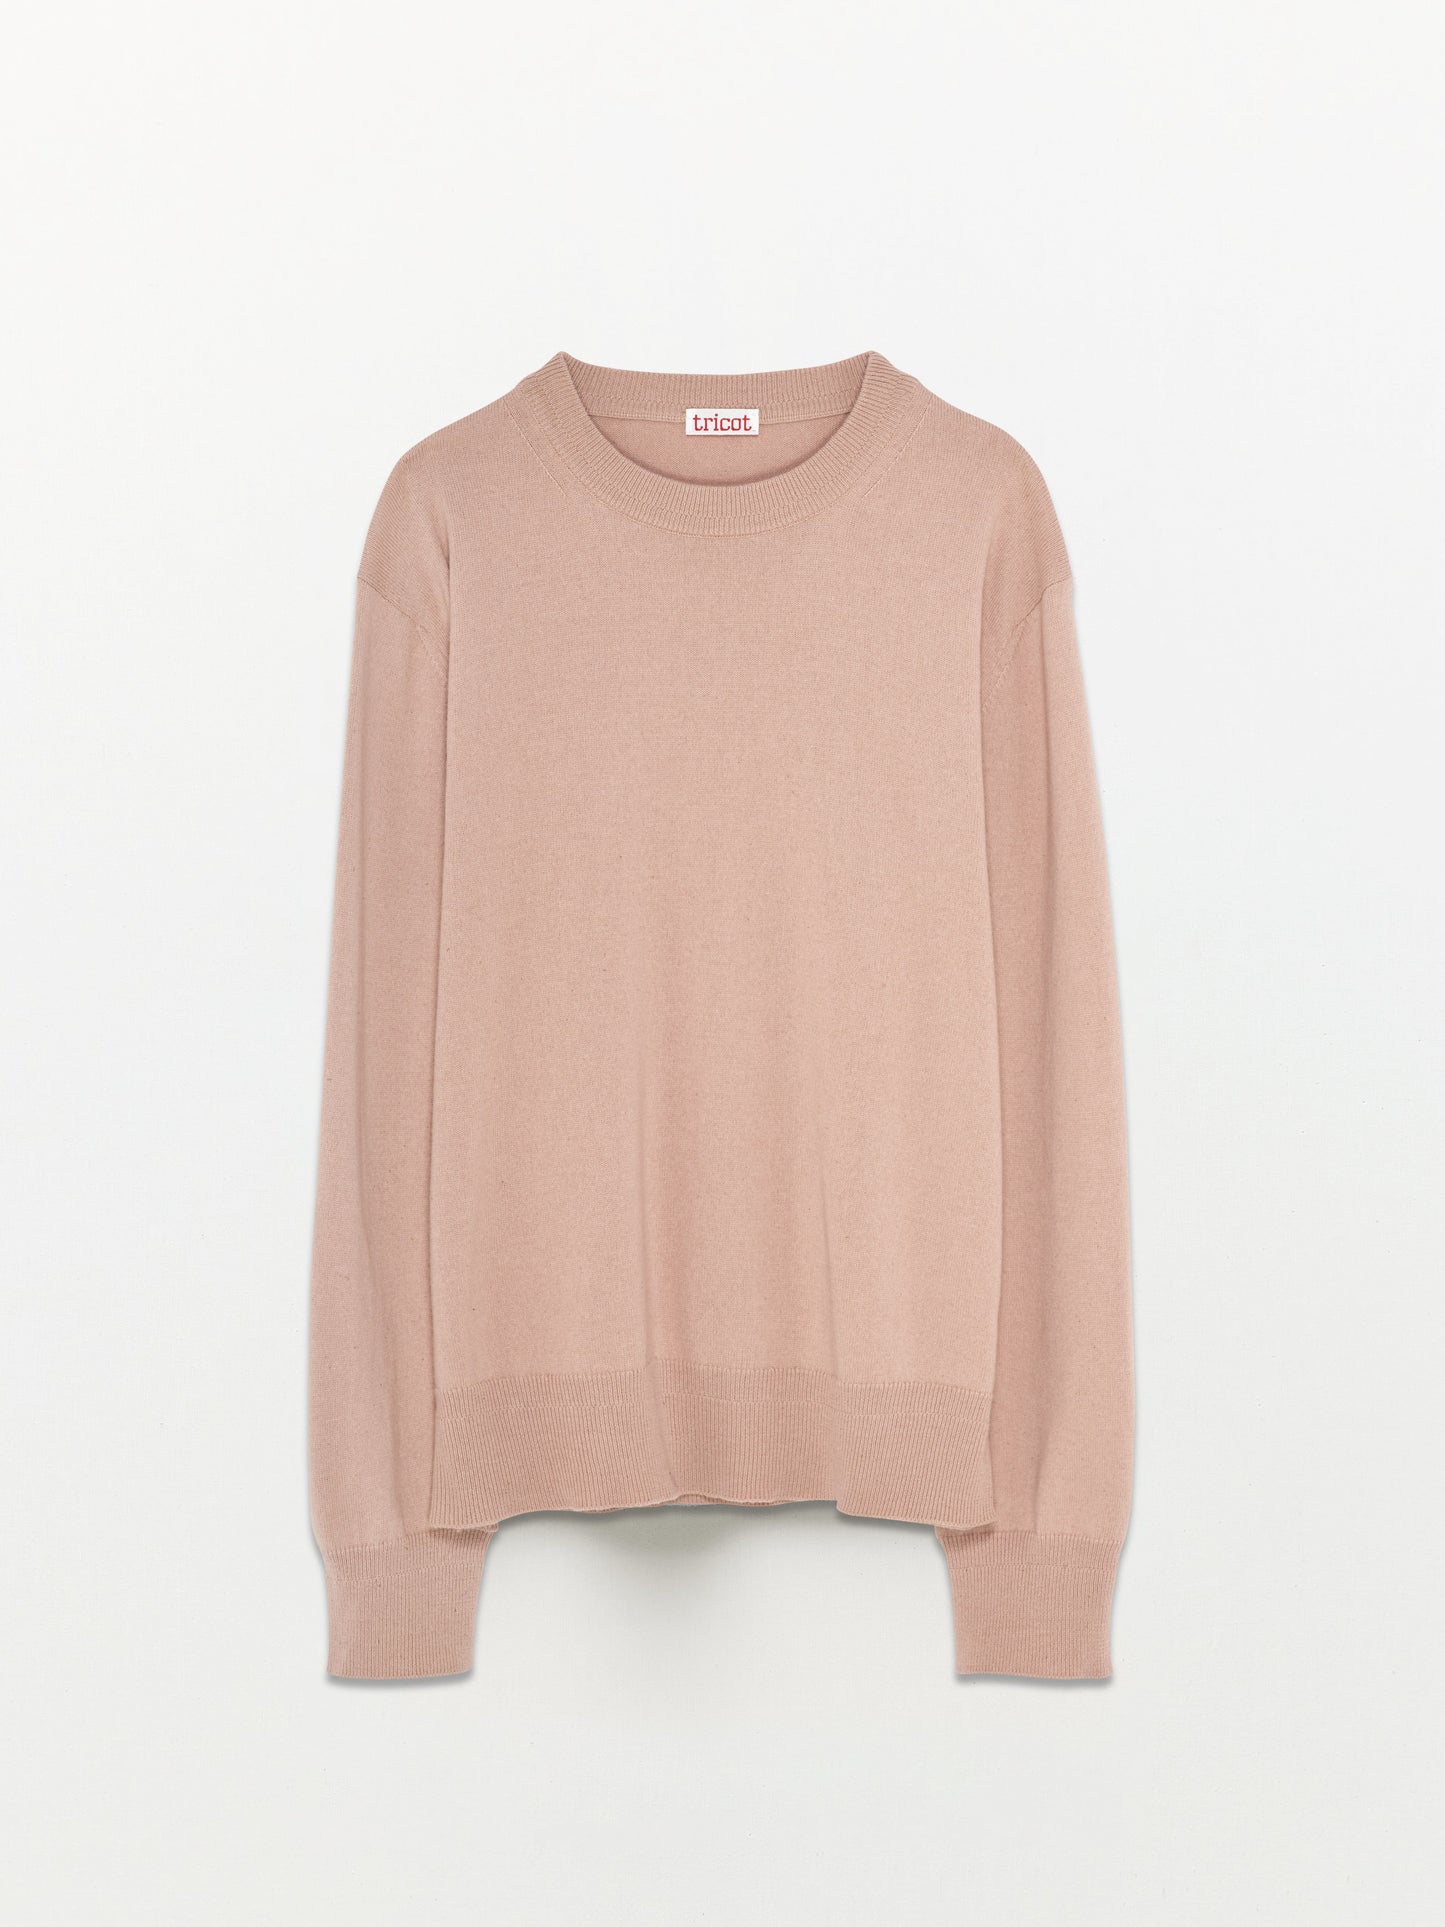 Women’s Pink Recycled Cashmere & Cotton Sweater